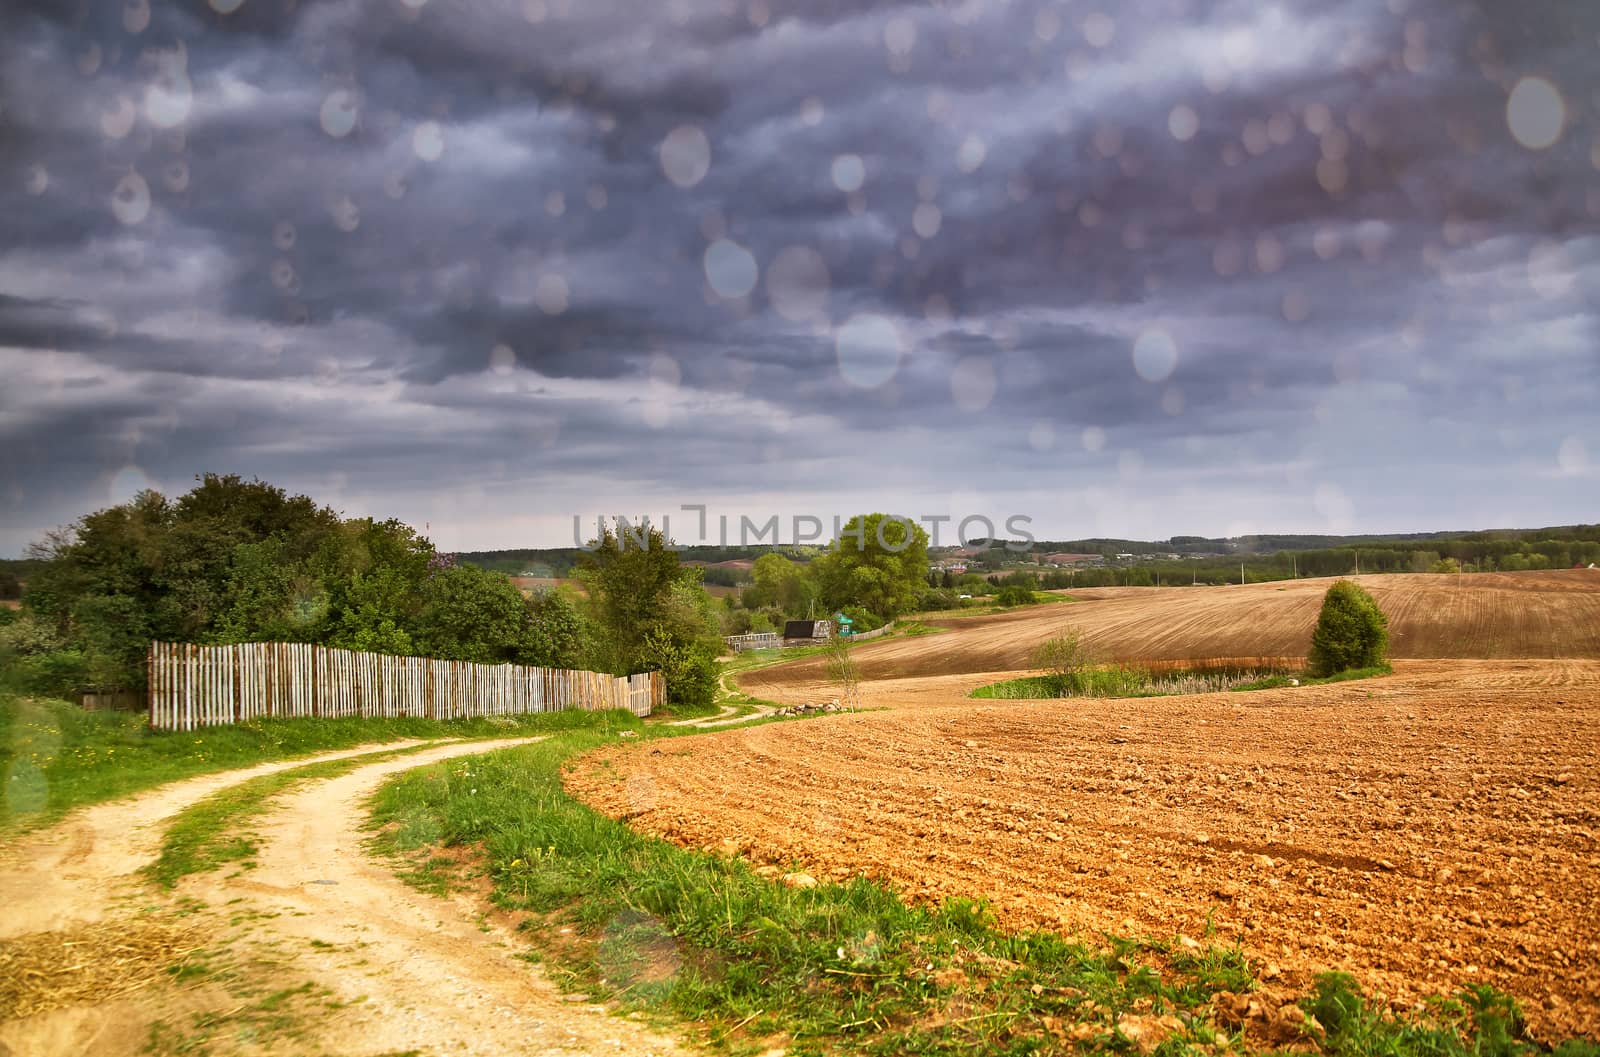 Rain. Spring storm clouds above country road by weise_maxim